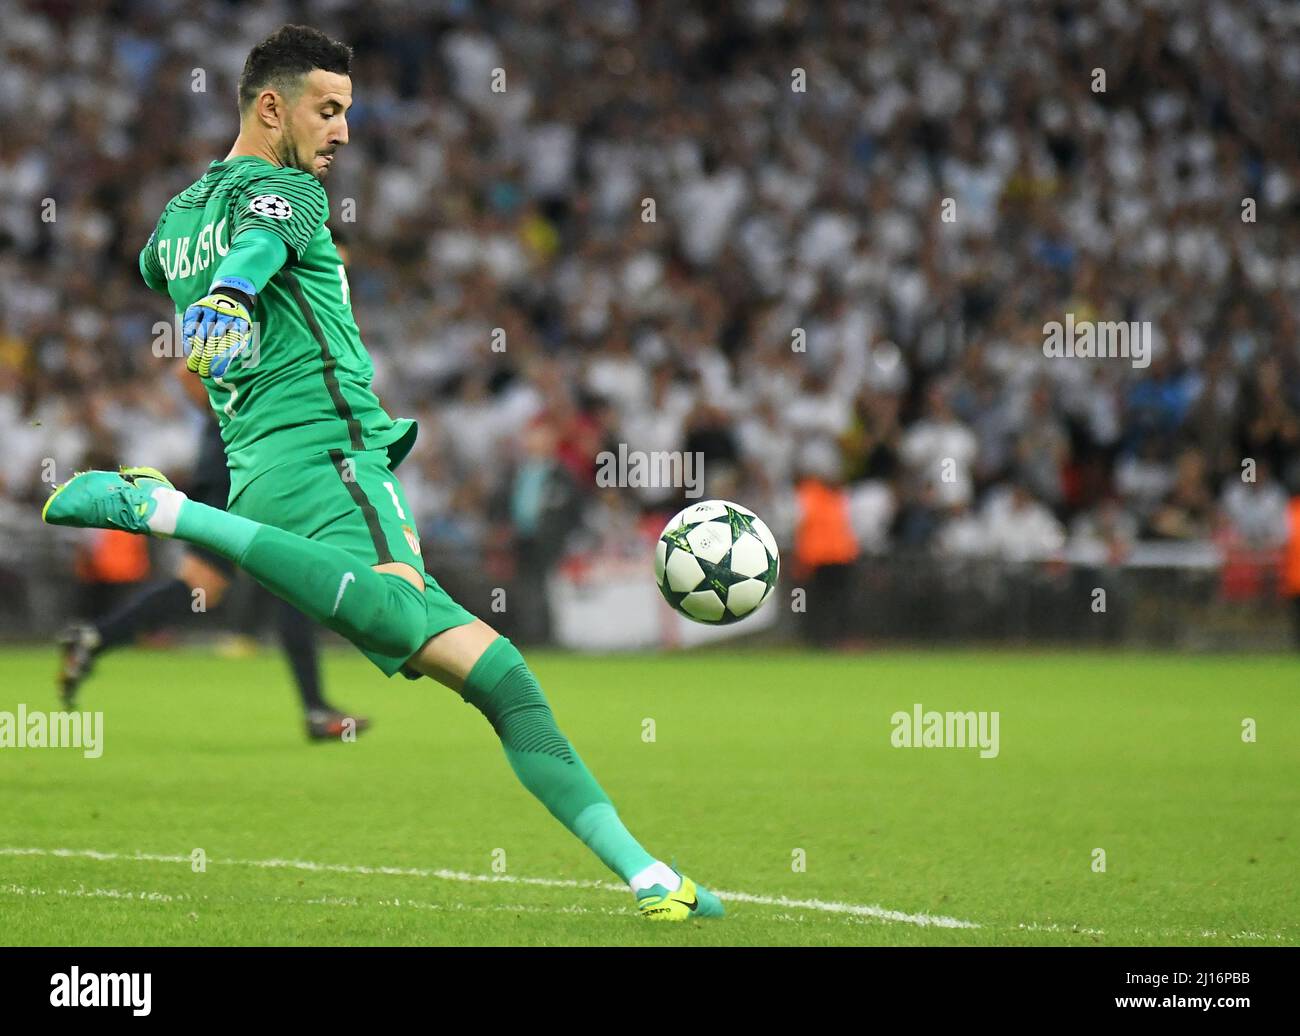 MANCHESTER, ENGLAND - SEPTEMBER 14, 2016: Danijel Subasic of Monaco pictured in action during the UEFA Champions League Group E game between Tottenham Hotspur and AS Monaco at Wembley Stadium. Copyright: Cosmin Iftode/Picstaff Stock Photo